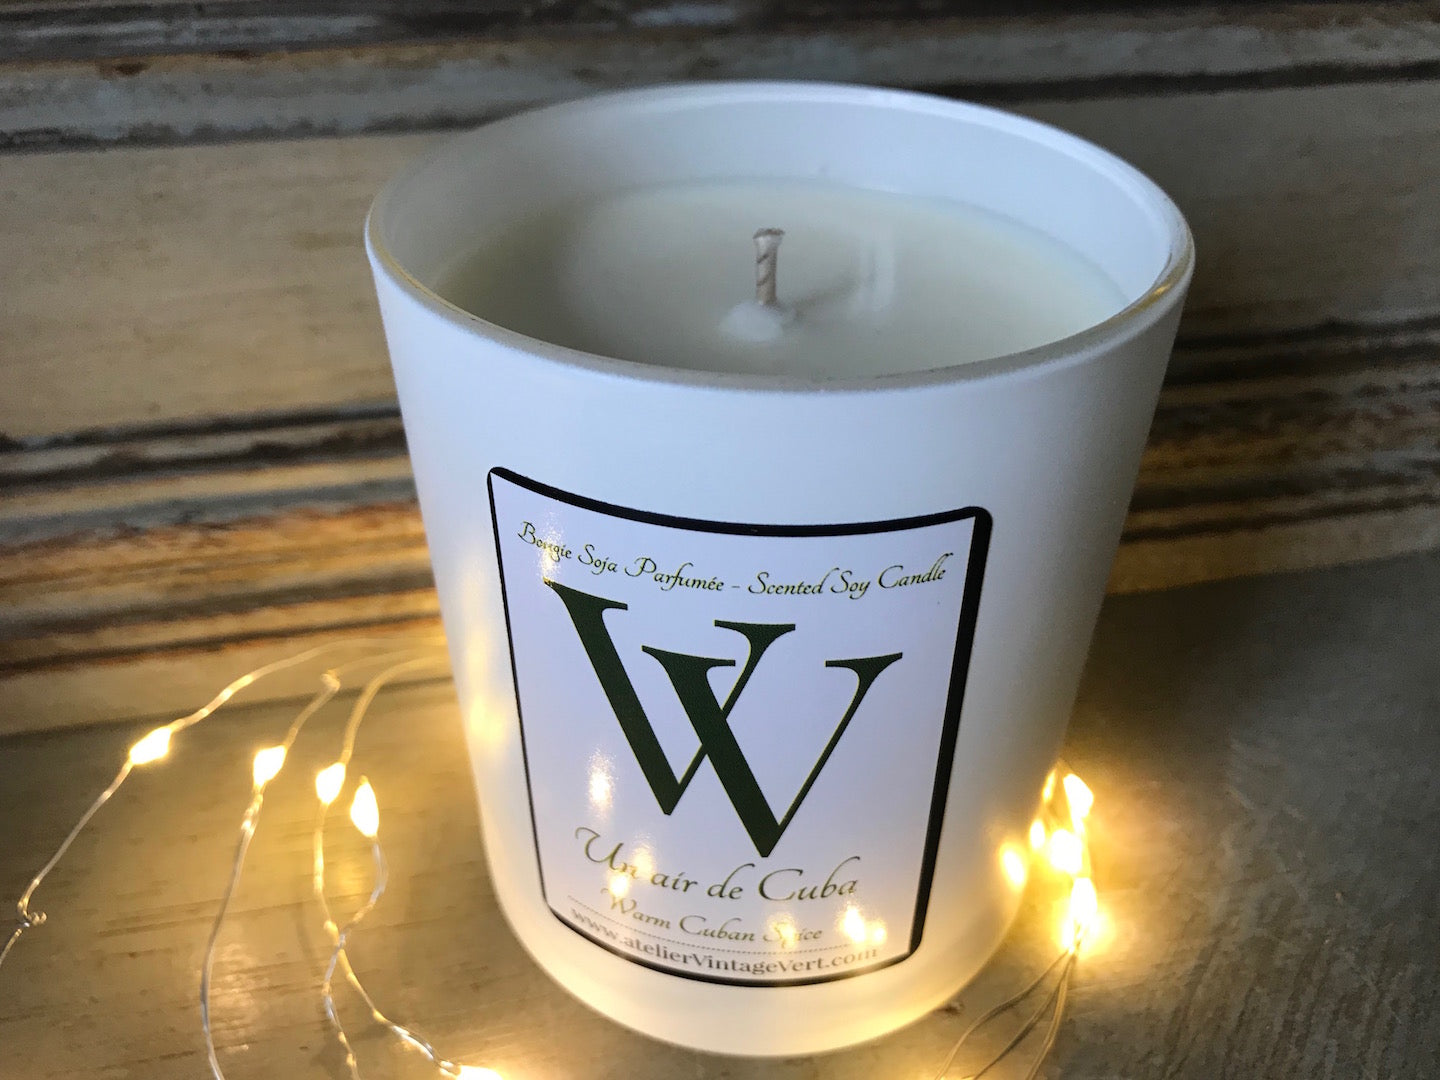 Soy Candle - Warm Cuban Spice